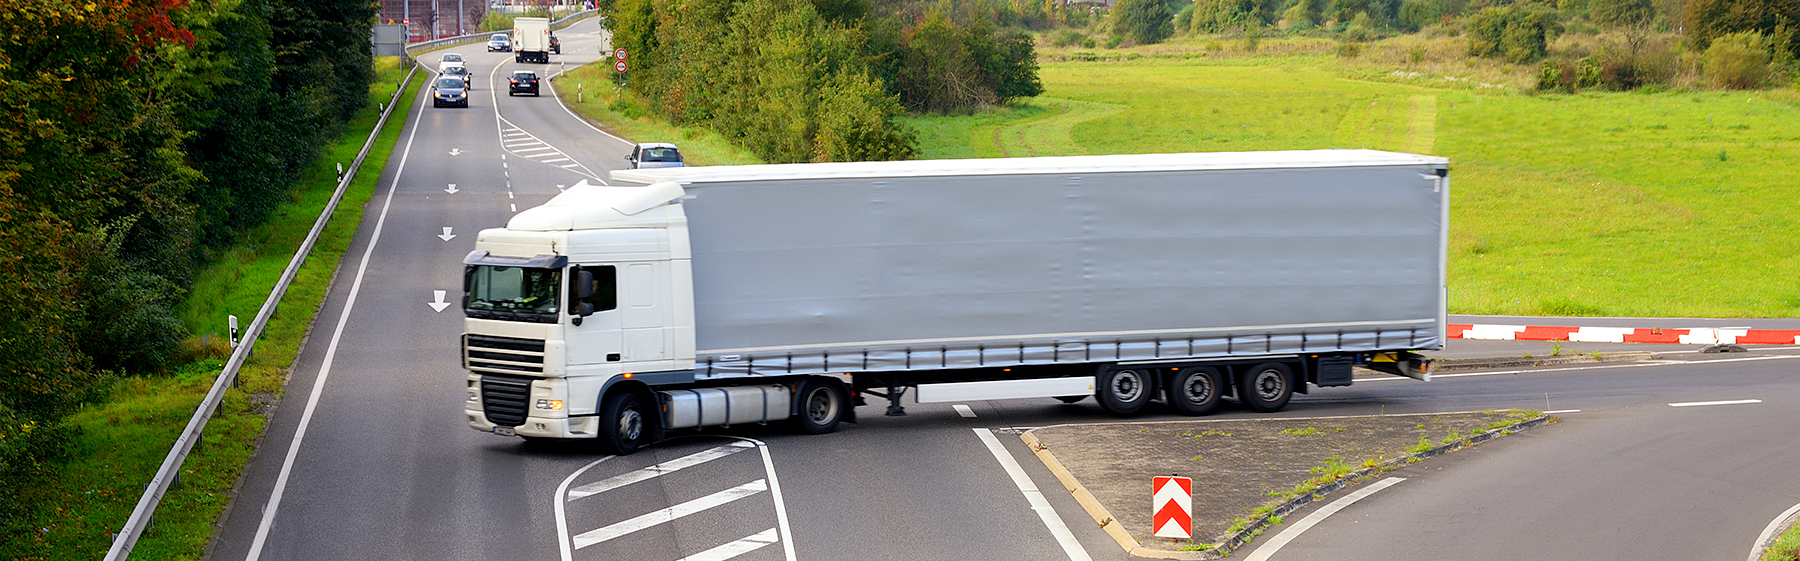 Truck drivers use wide turns as one of their most dangerous maneuvers.